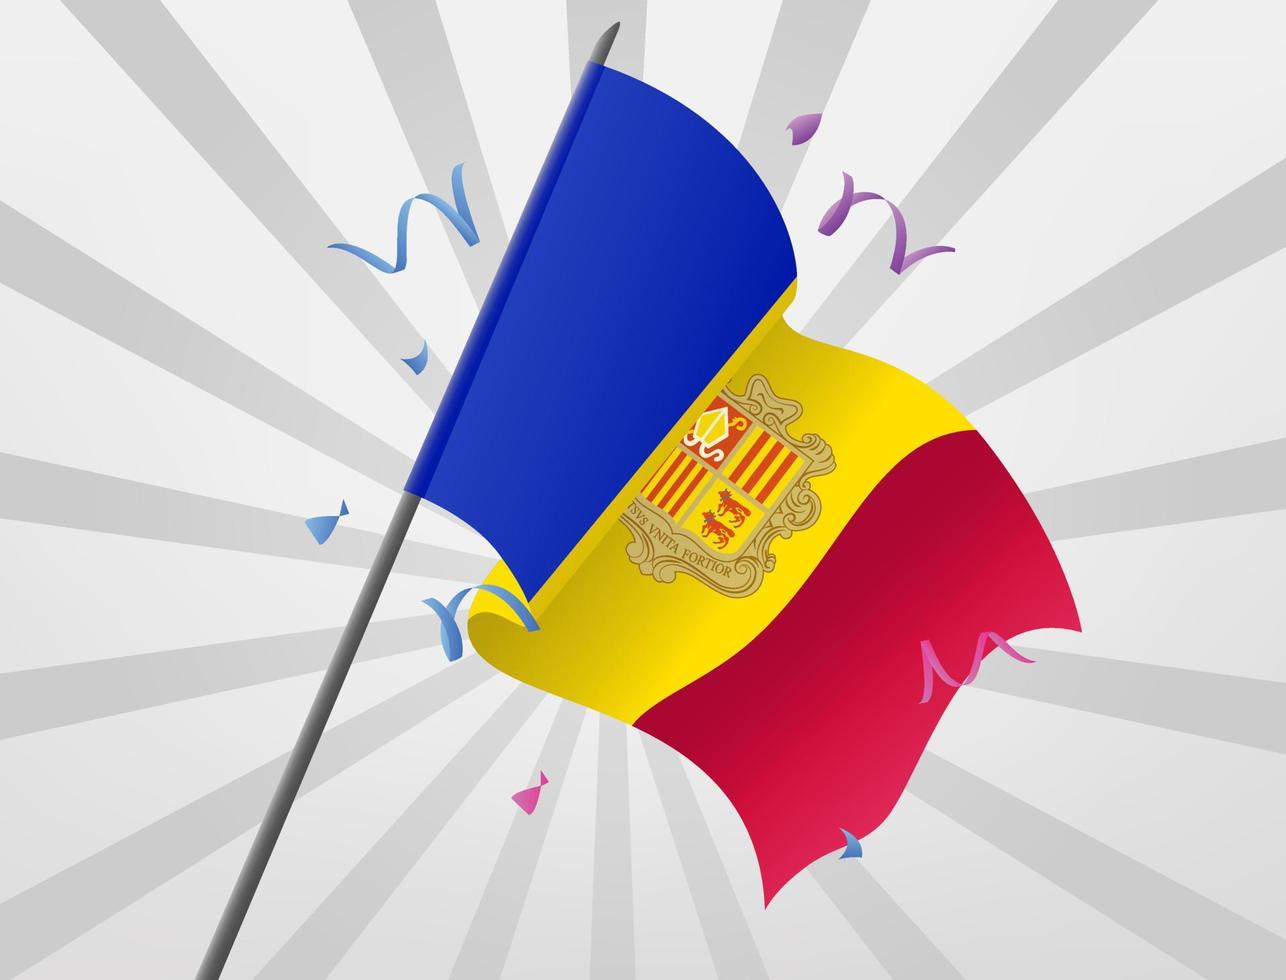 The celebratory flag of Andorra flies at height vector